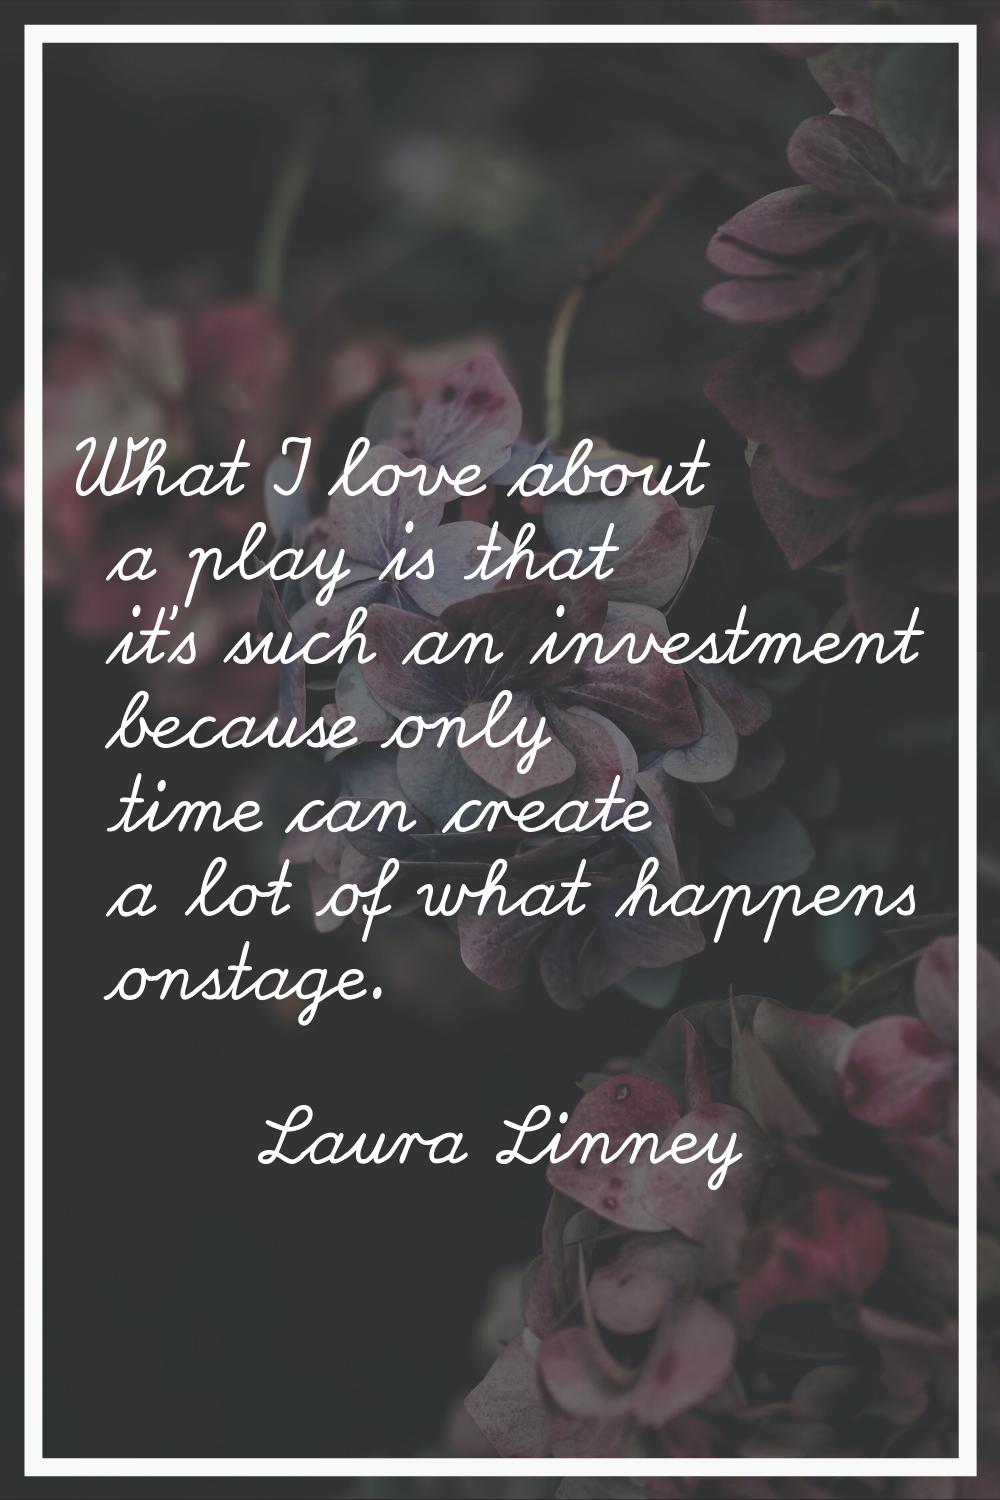 What I love about a play is that it's such an investment because only time can create a lot of what